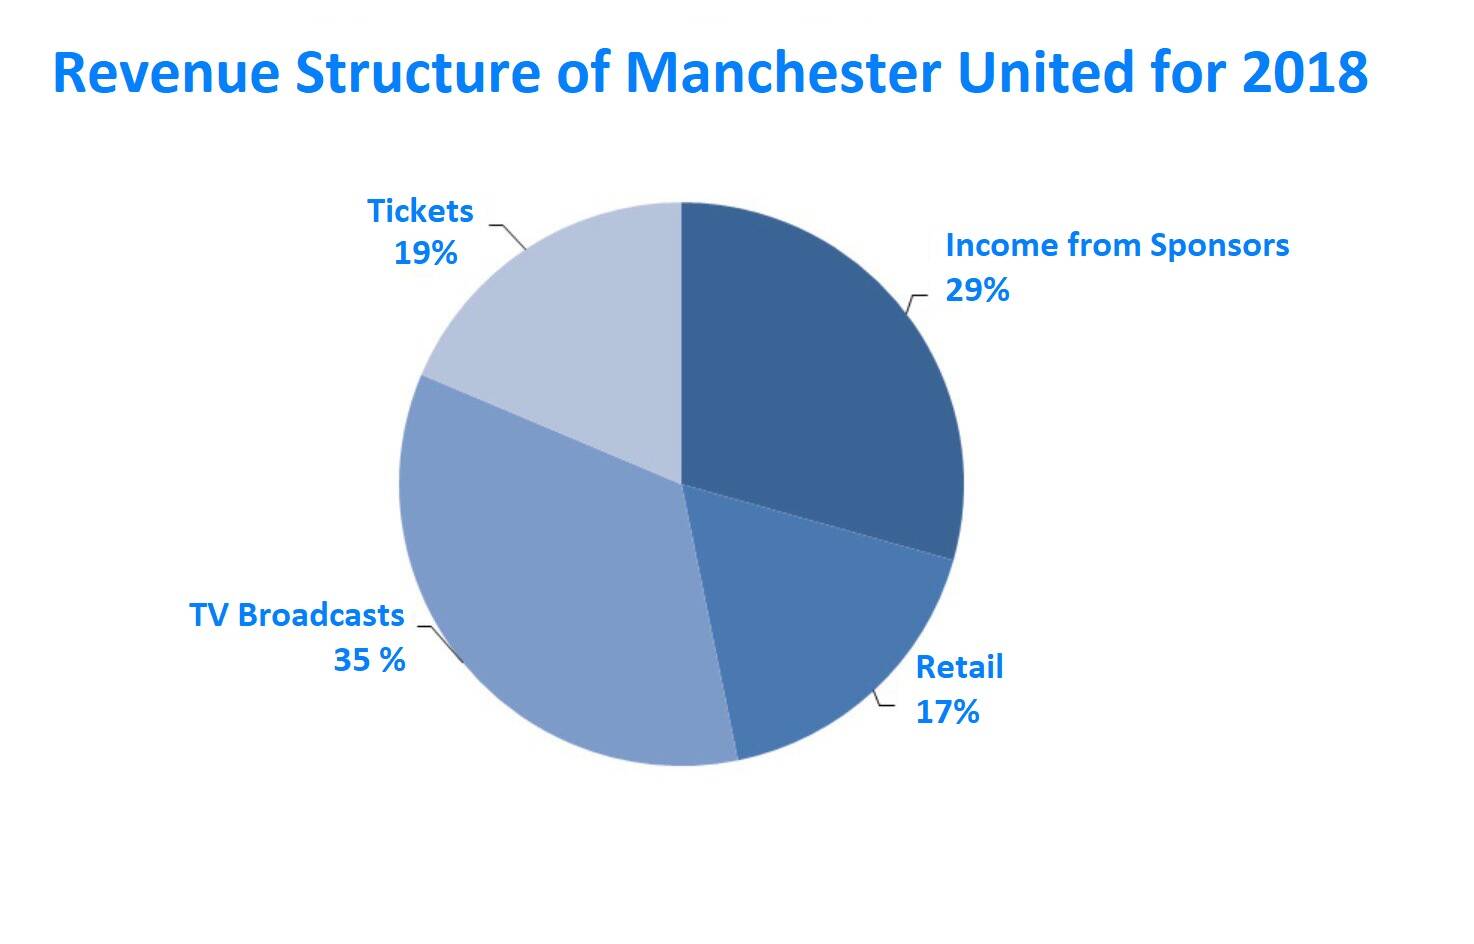 Revenue of Manchester United for 2018